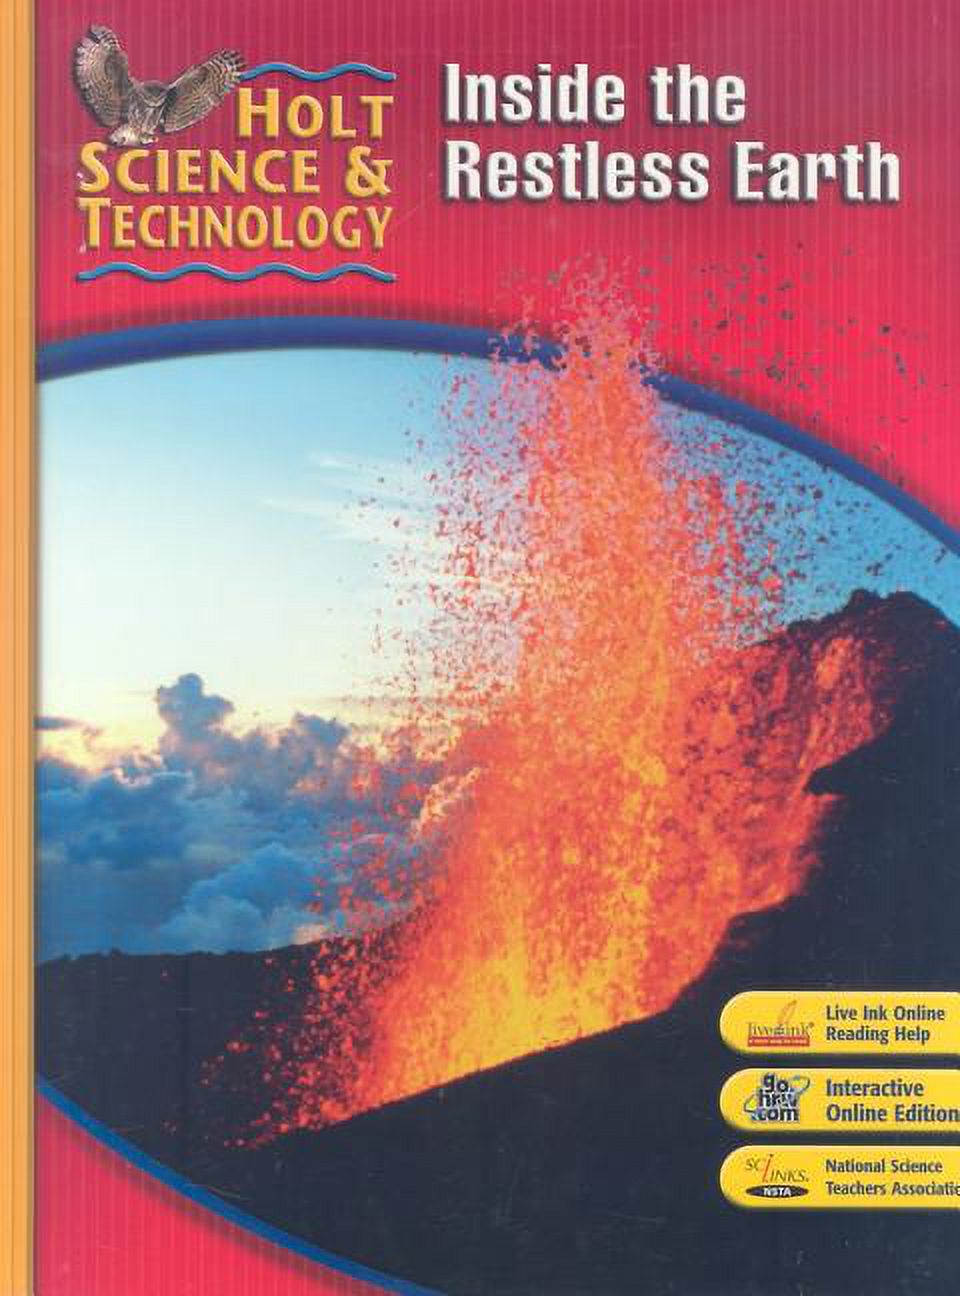 the　2007　Holt　Student　Science　Restless　F:　Technology:　Edition　(Paperback)　Inside　Earth